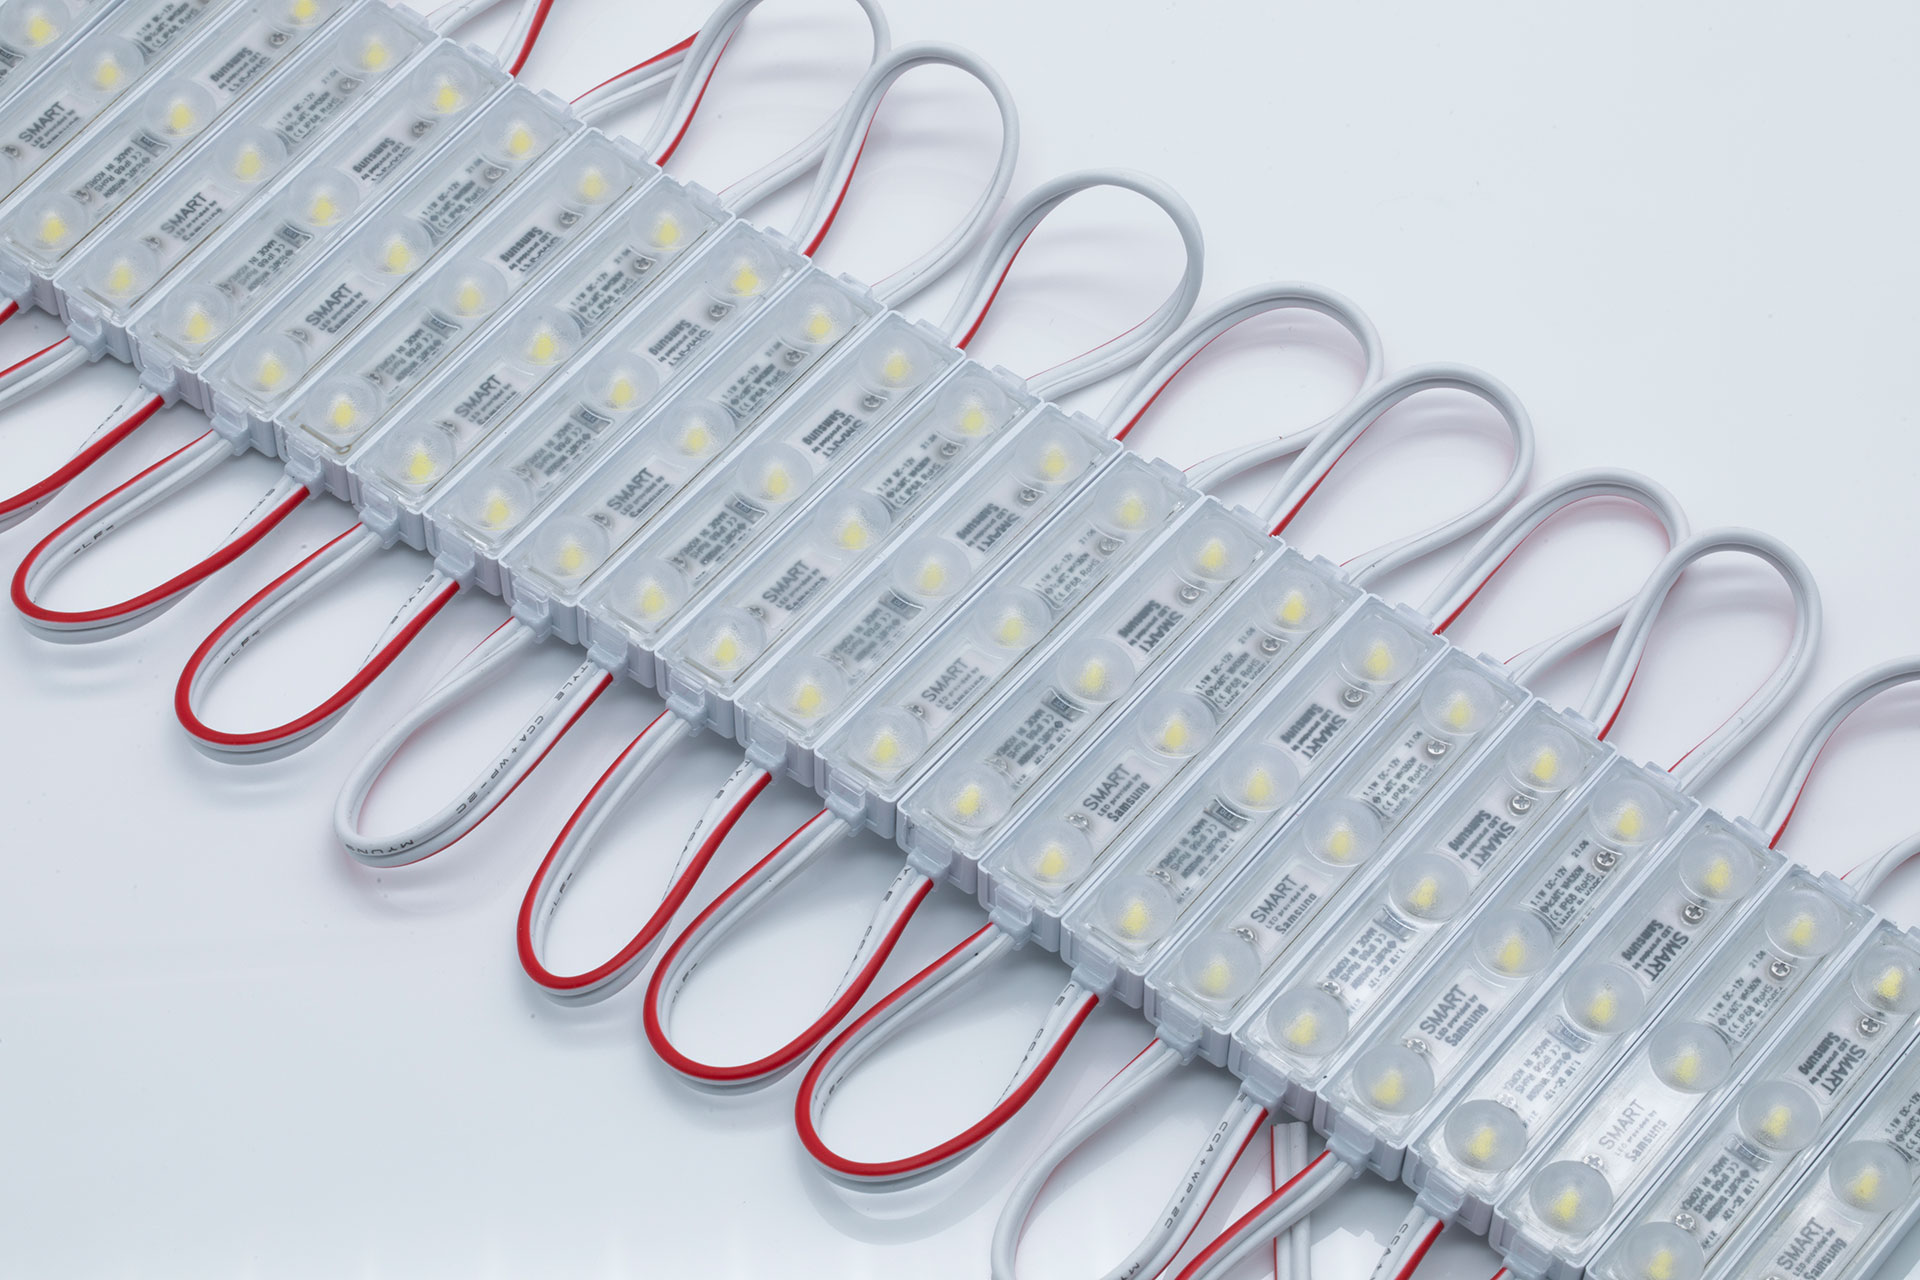 LED Module Leading supplier for LED Strips, Modules & Drivers in UAE